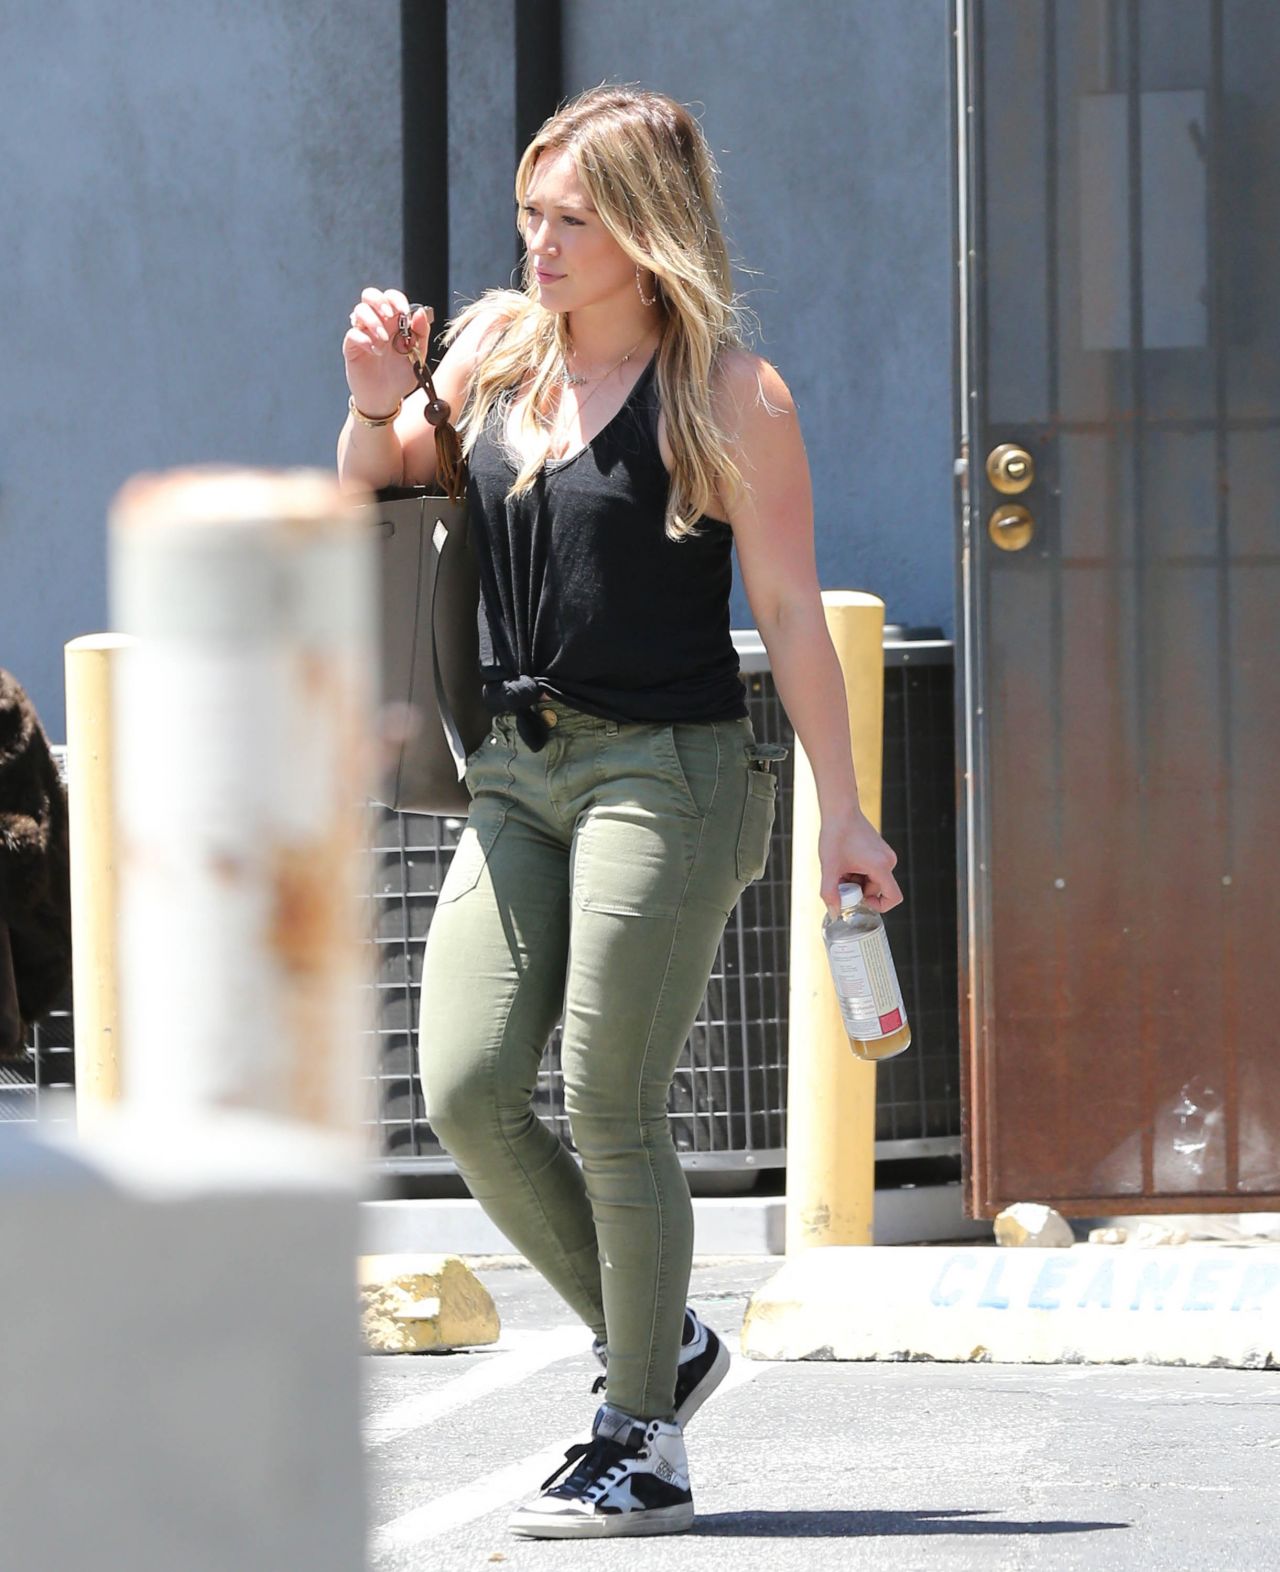 hilary-duff-street-style-heading-to-a-dance-studio-in-hollywood-june-215_7.